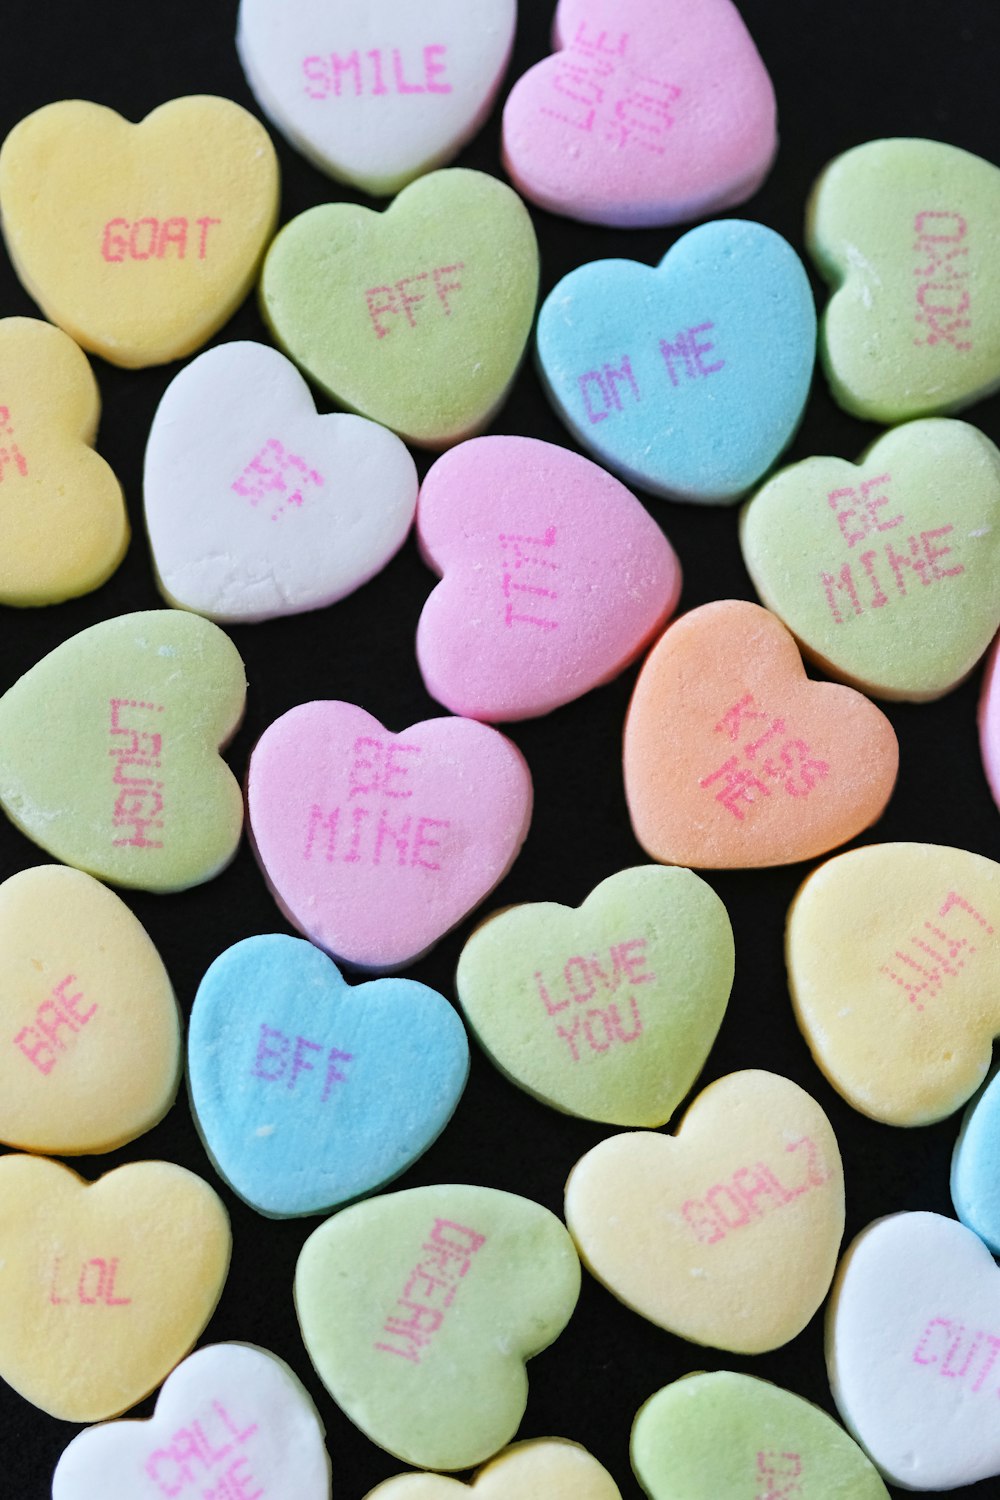 conversation hearts with the words smile on them